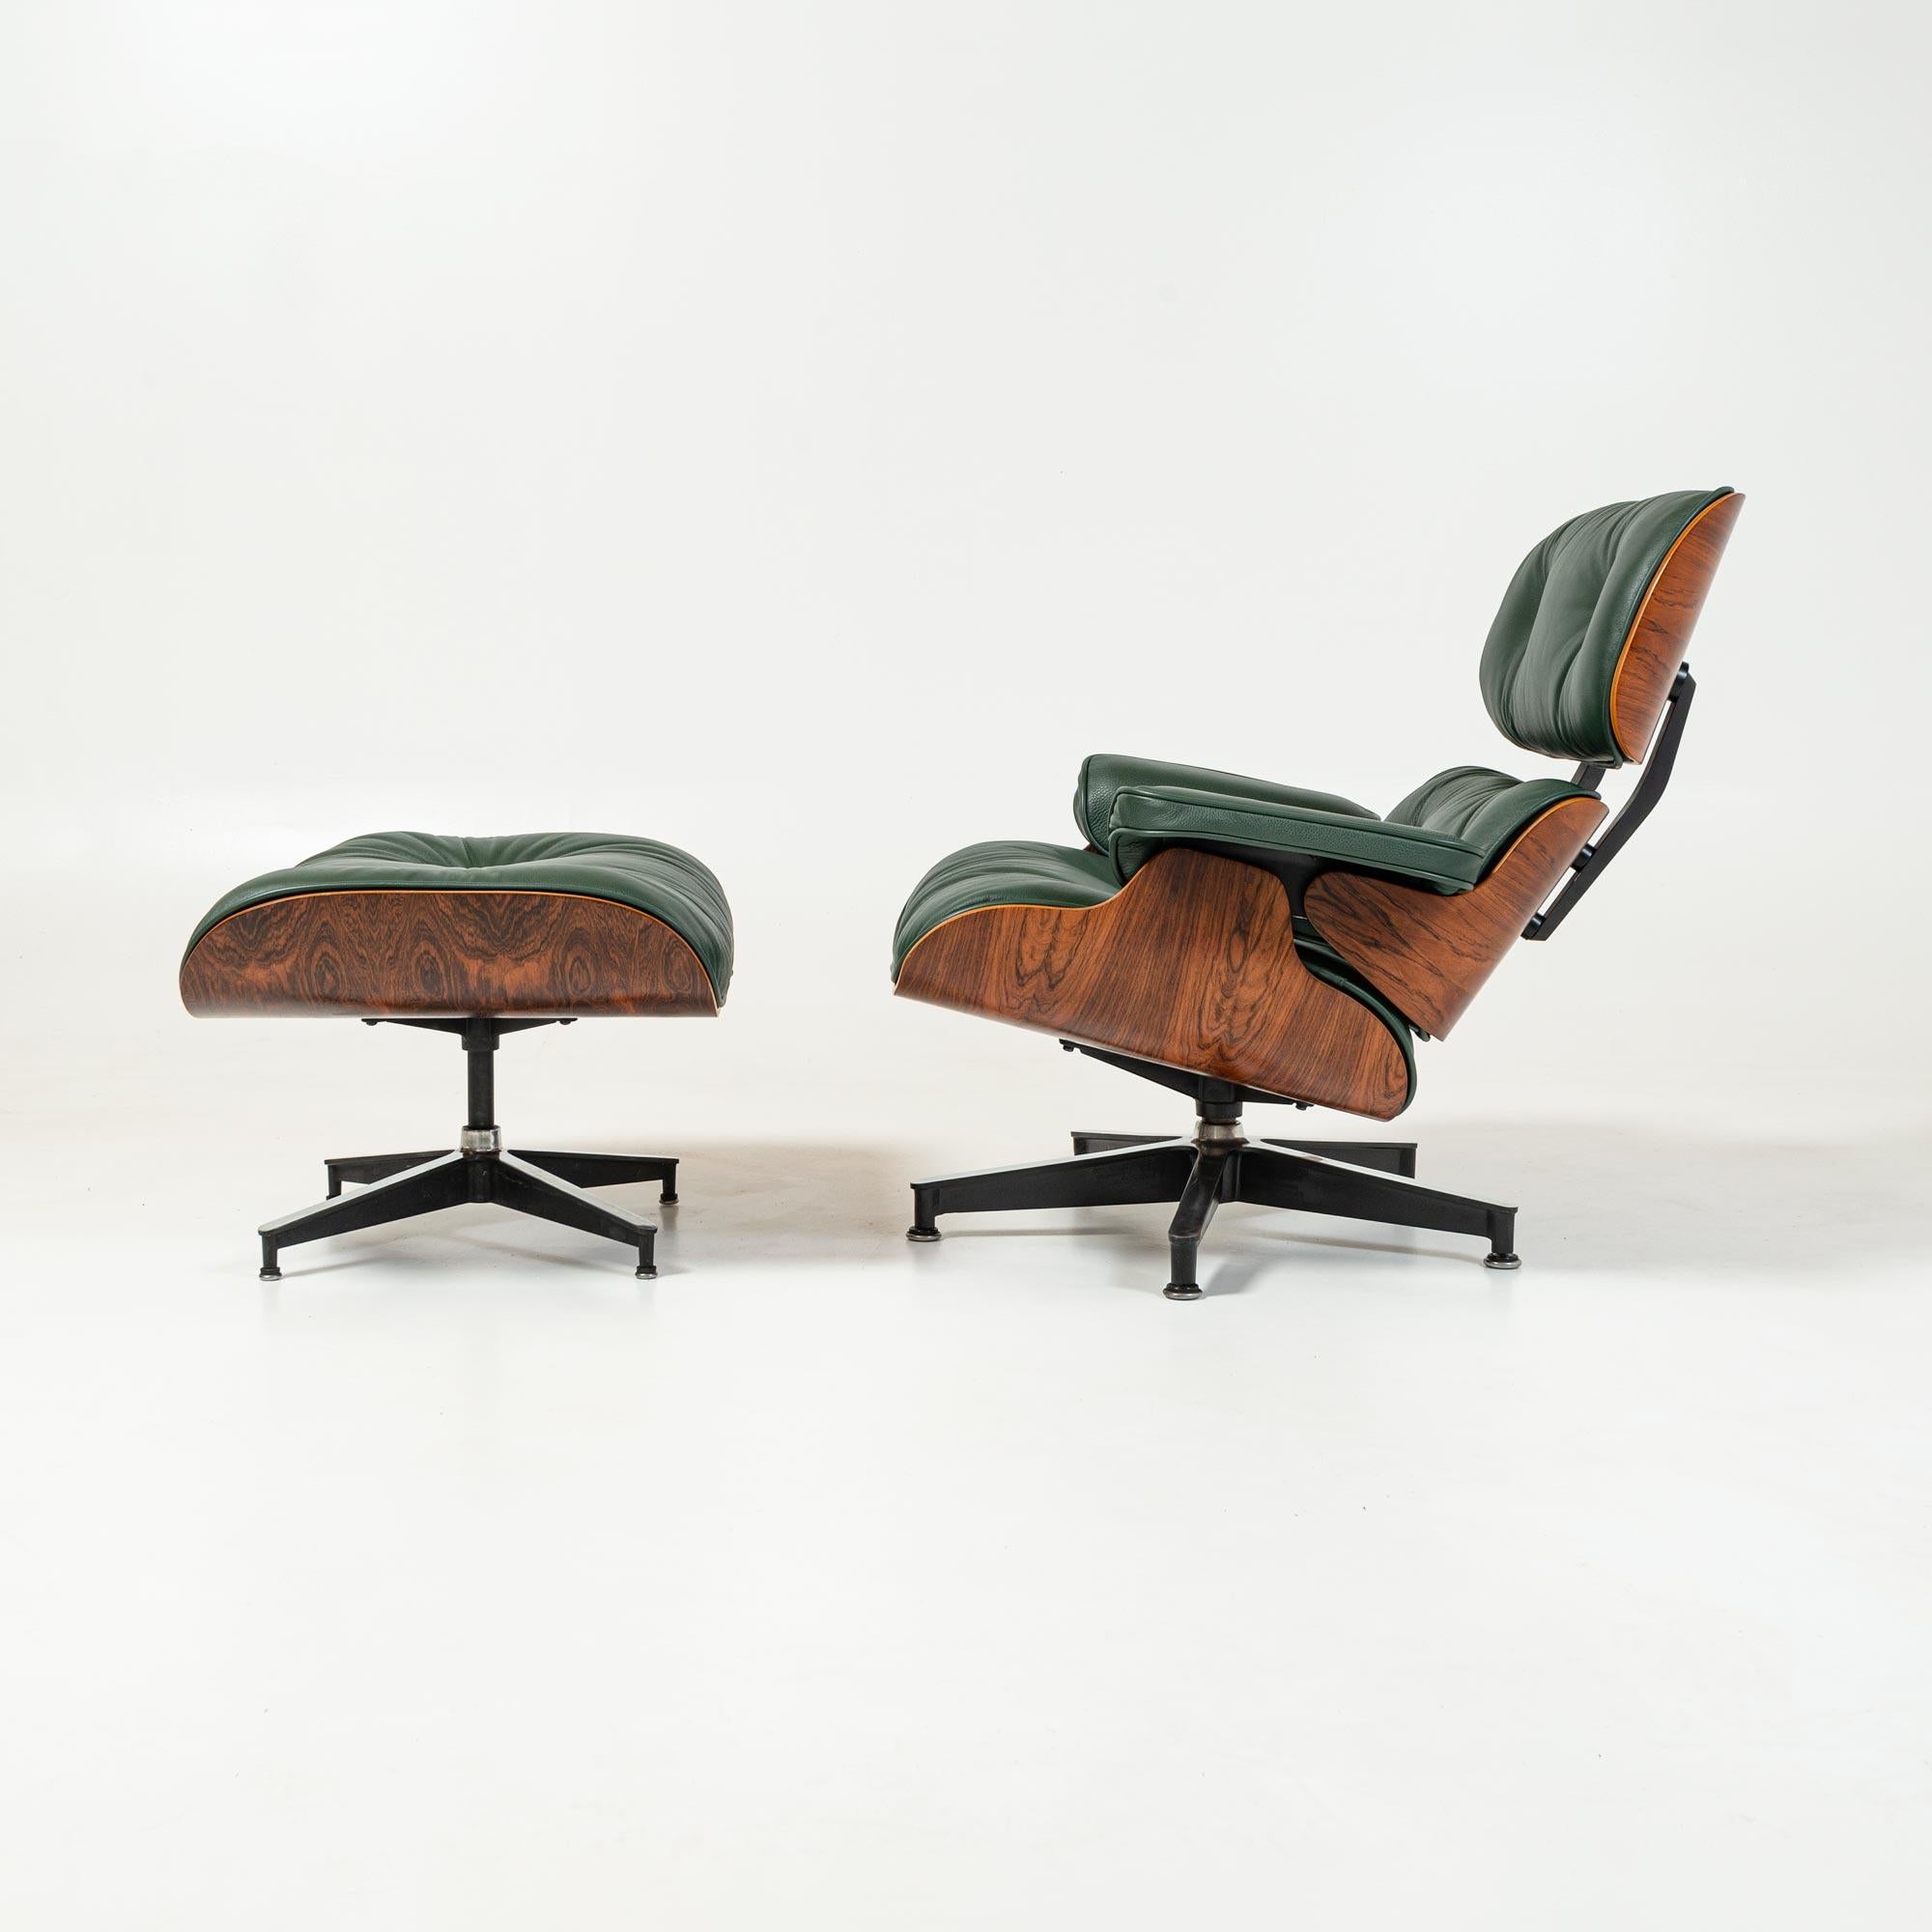 Fully Restored 3rd Gen Eames lounge chair in rosewood shell frames with ottoman, re-upholstered in decadent Elmo Baltique Forest Green leather.

Elmobaltique is a sturdy Aniline leather with a slight batique-effect. It possesses the characteristic